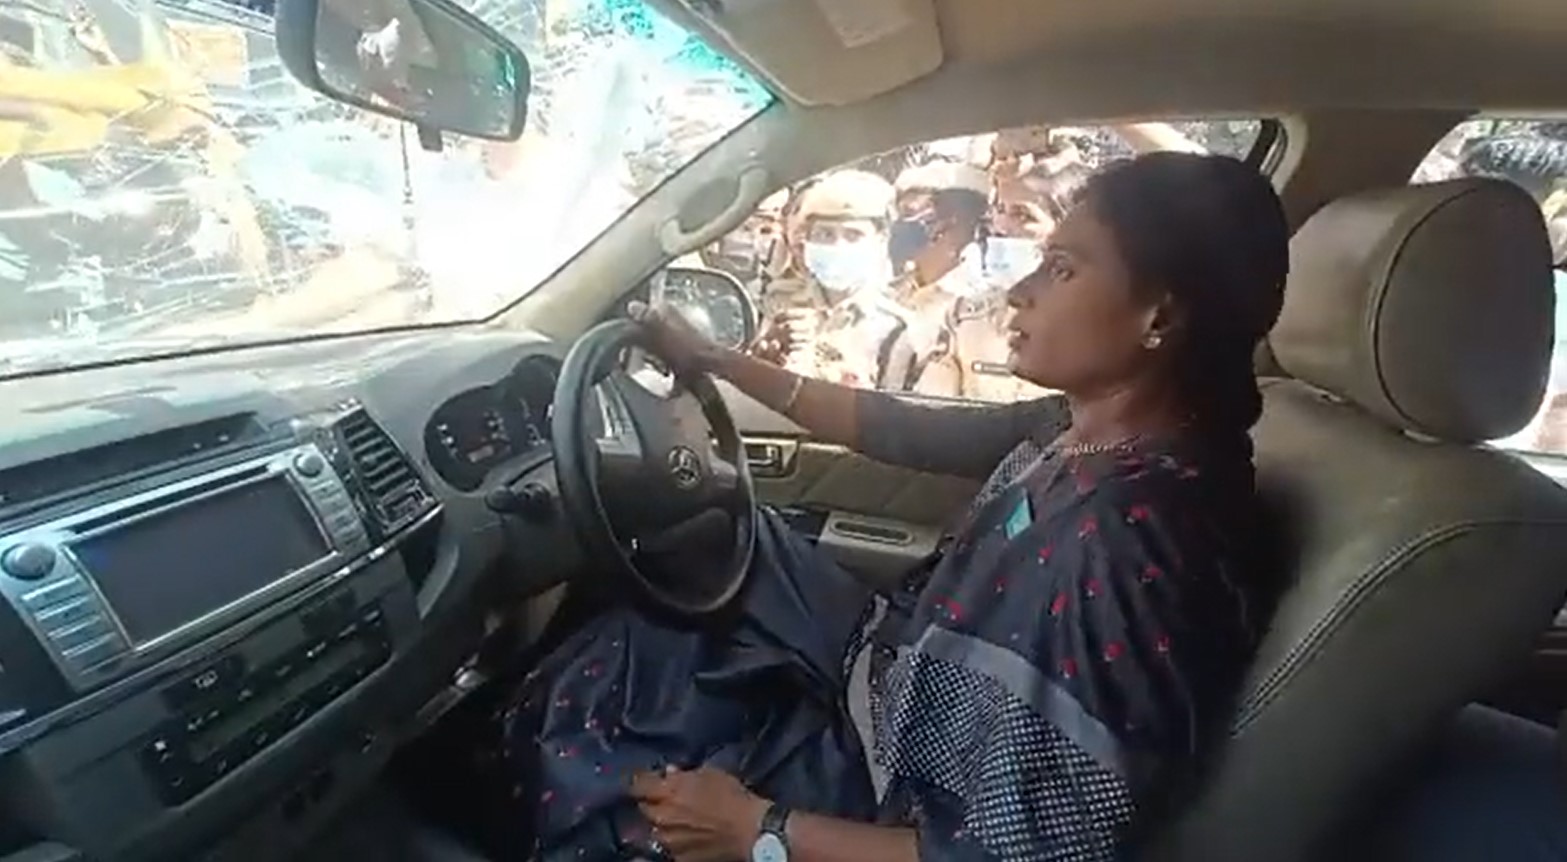 YS Sharmila in her car as it was towed on Tuesday, 29 November, 2022. (Screengrab)